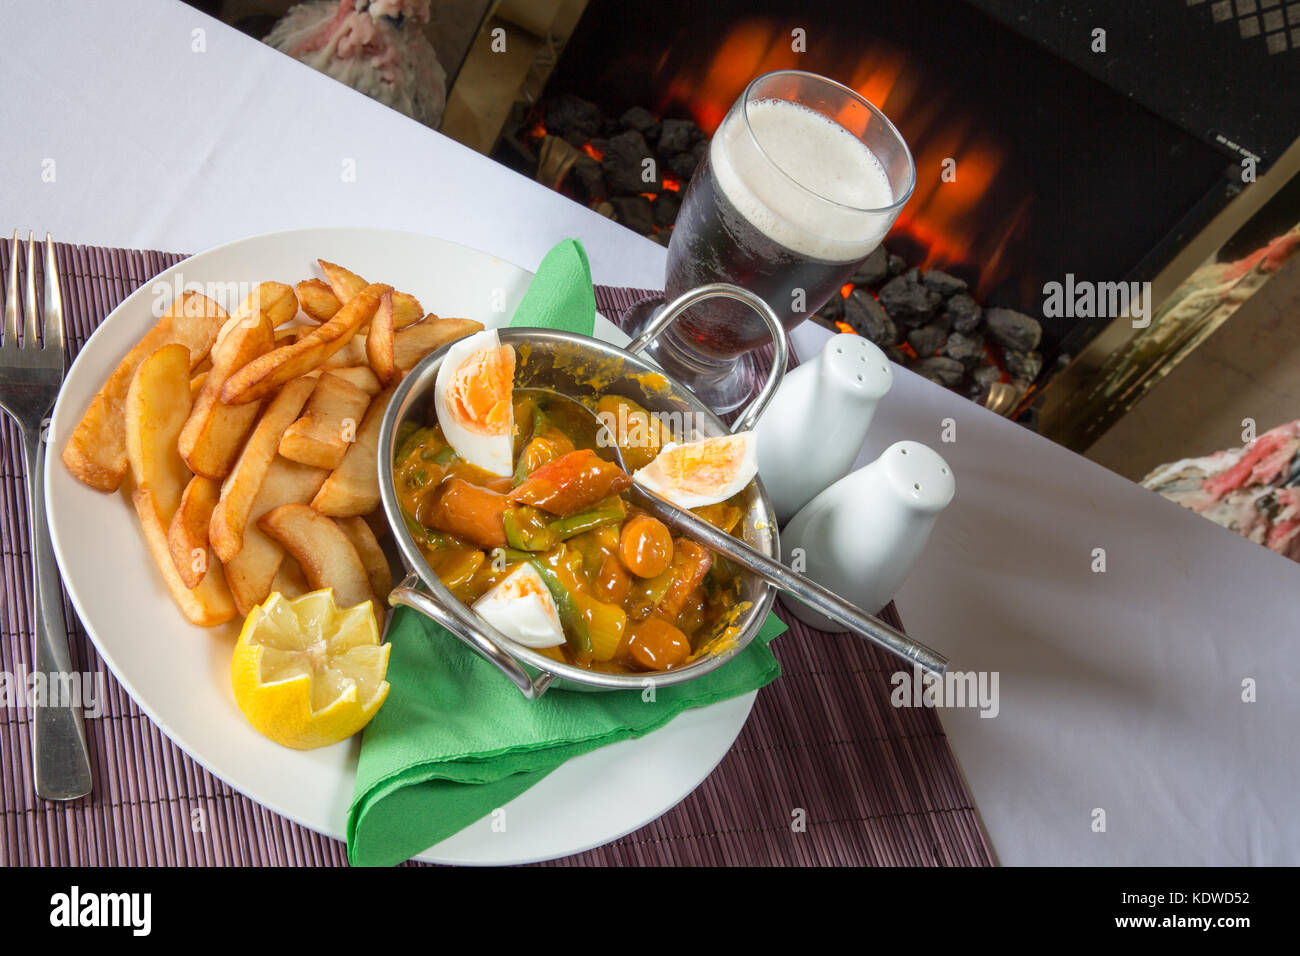 English pub meal of Curried Sausage with boiled egg and potato chips/fries with a glass of ale/beer Stock Photo